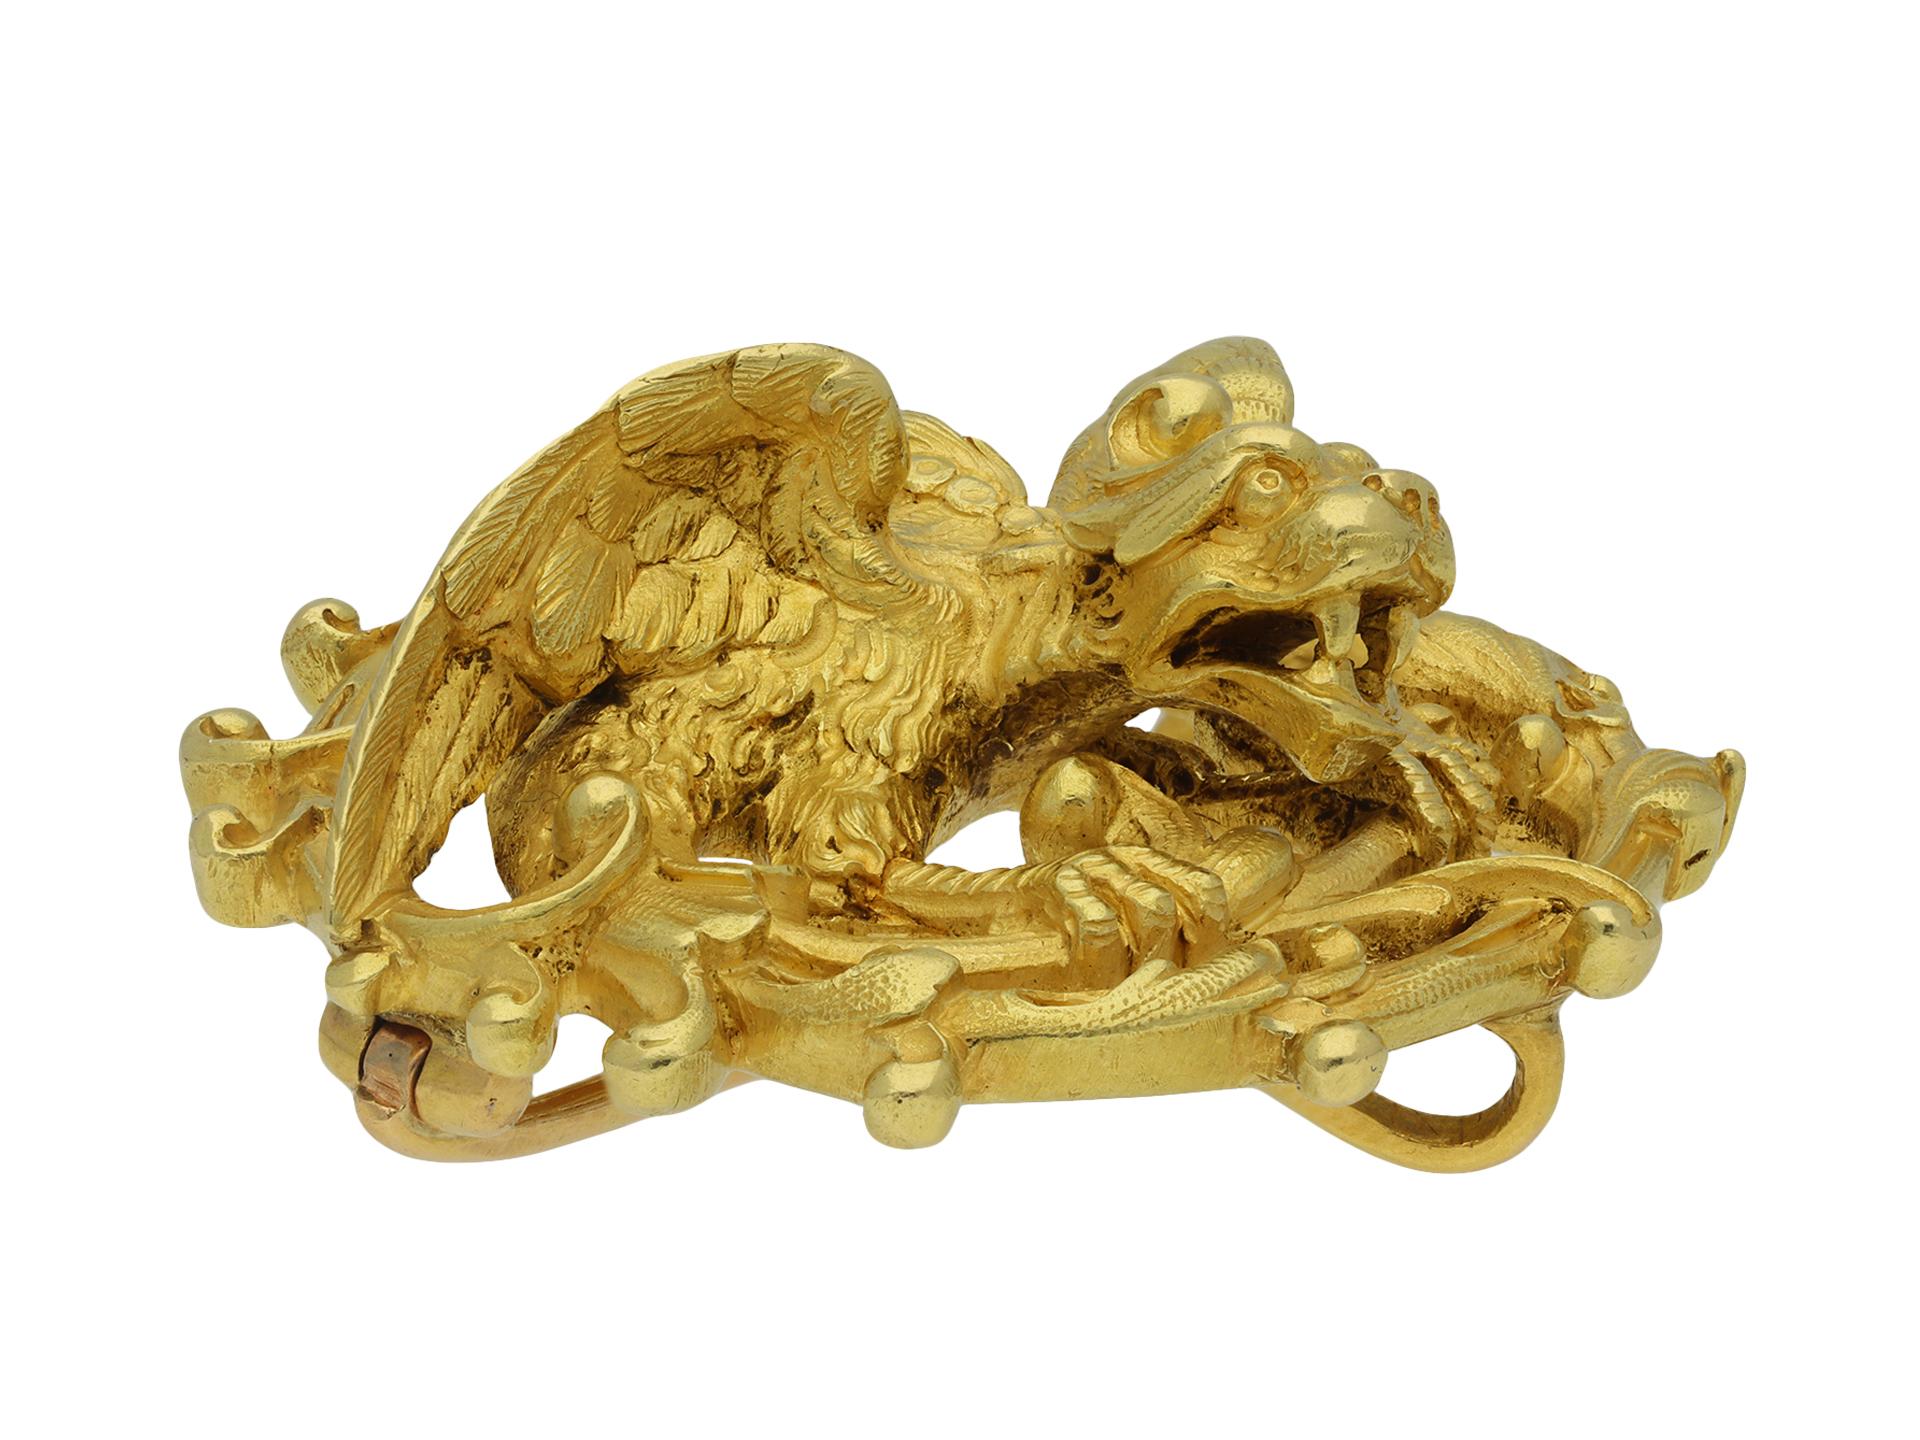 Maison Plisson et Hartz chimera brooch. A circular yellow gold brooch, composed of an intricately carved crouching chimera with teeth bared and wings unfurled, encircled by a swirl of openwork scrolling foliage, with fine engraved detailing